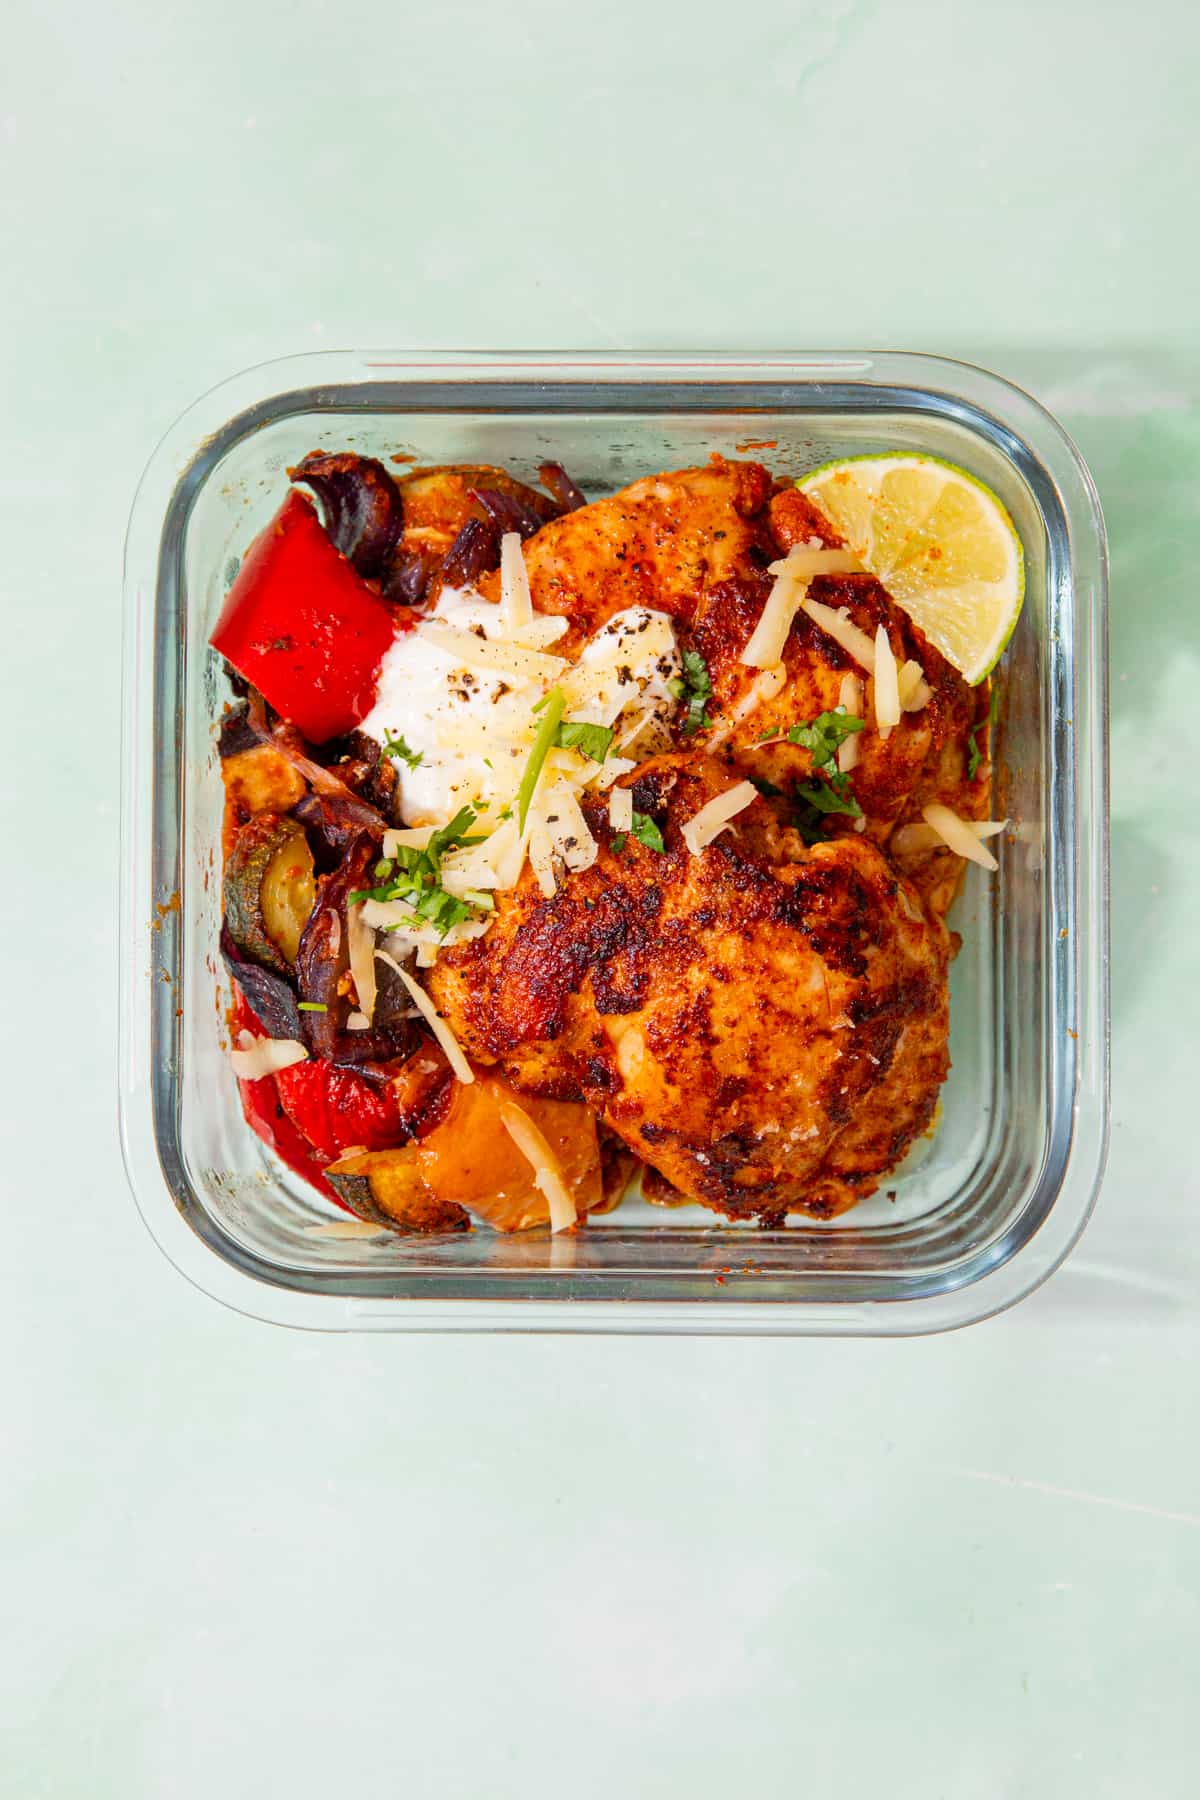 1 meal prep square, glass meal prep container with roasted chicken, vegetables, sour cream, a wedge of lime and grated cheddar.